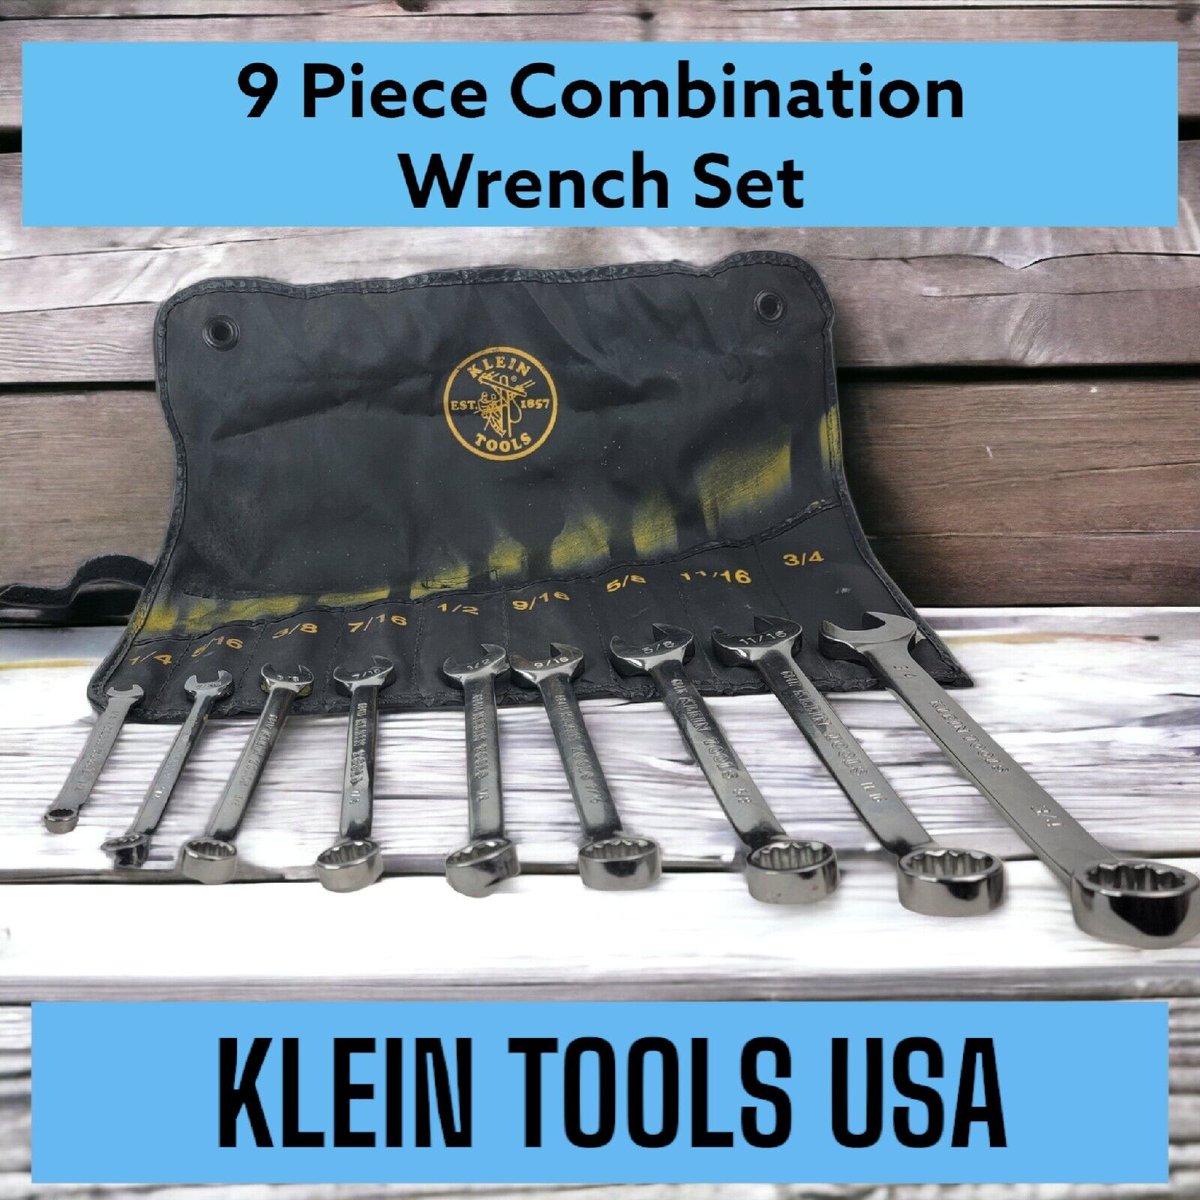 🔧 Upgrade your toolkit with the Klein Tools USA 9-Piece Combination SAE Wrench Set! From 1/4' to 3/4', it's the perfect companion for any DIY project. #KleinTools #QualityCraftsmanship ebay.com/itm/2256254123…